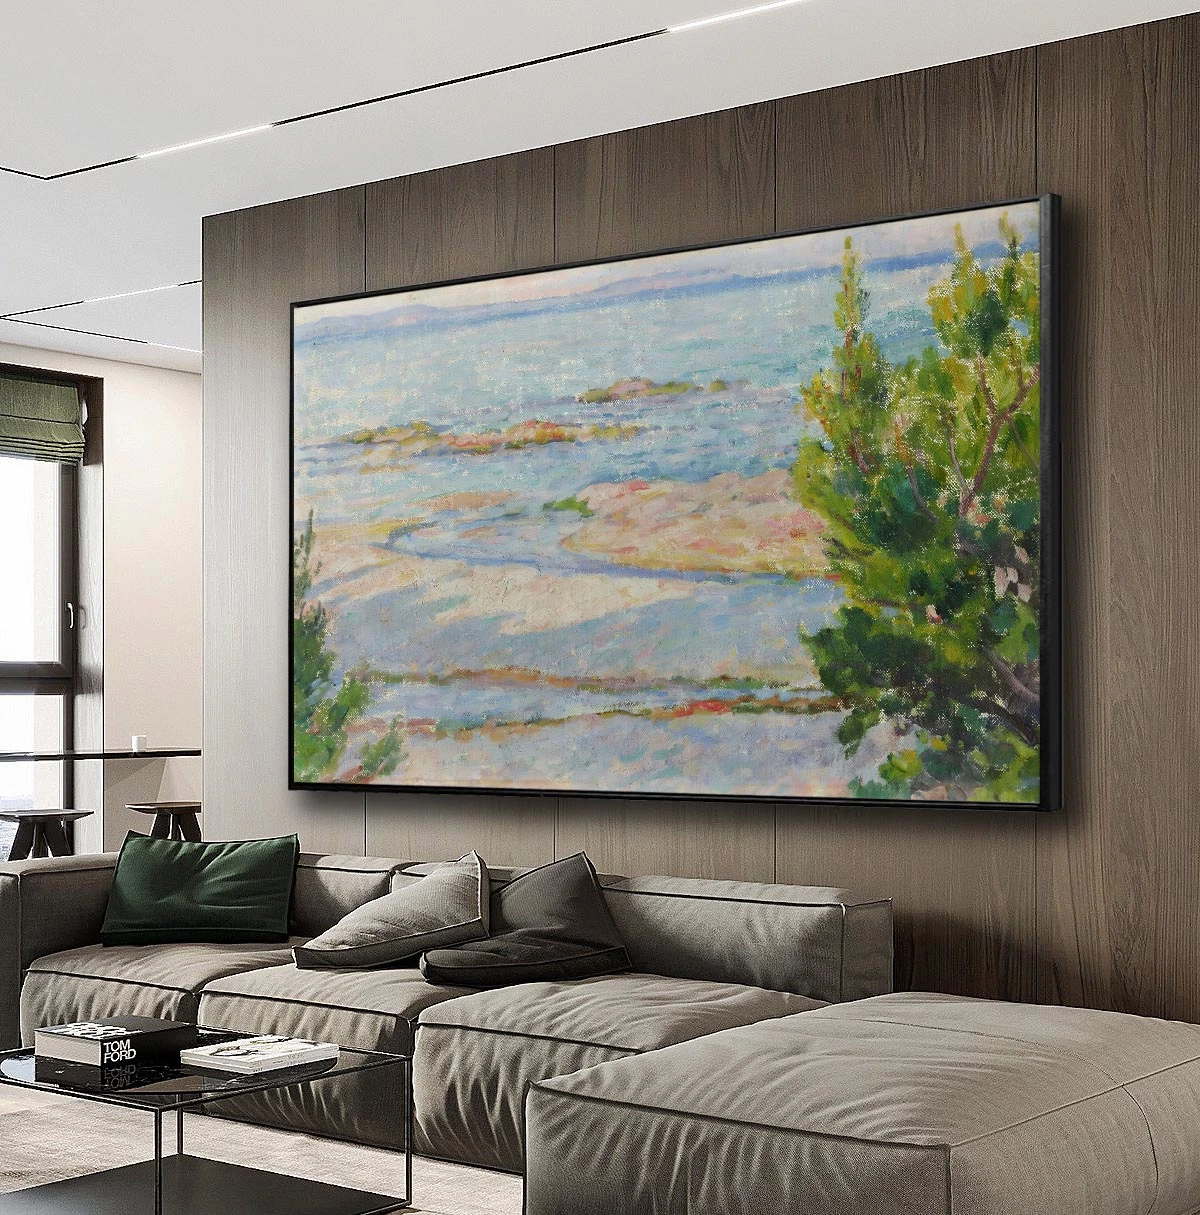 Scenery Landscape Abstract View Hand Painted Canvas Oil Painting Custom Cheap Home Hotel Decor Modern Framed Picture Wall Decor